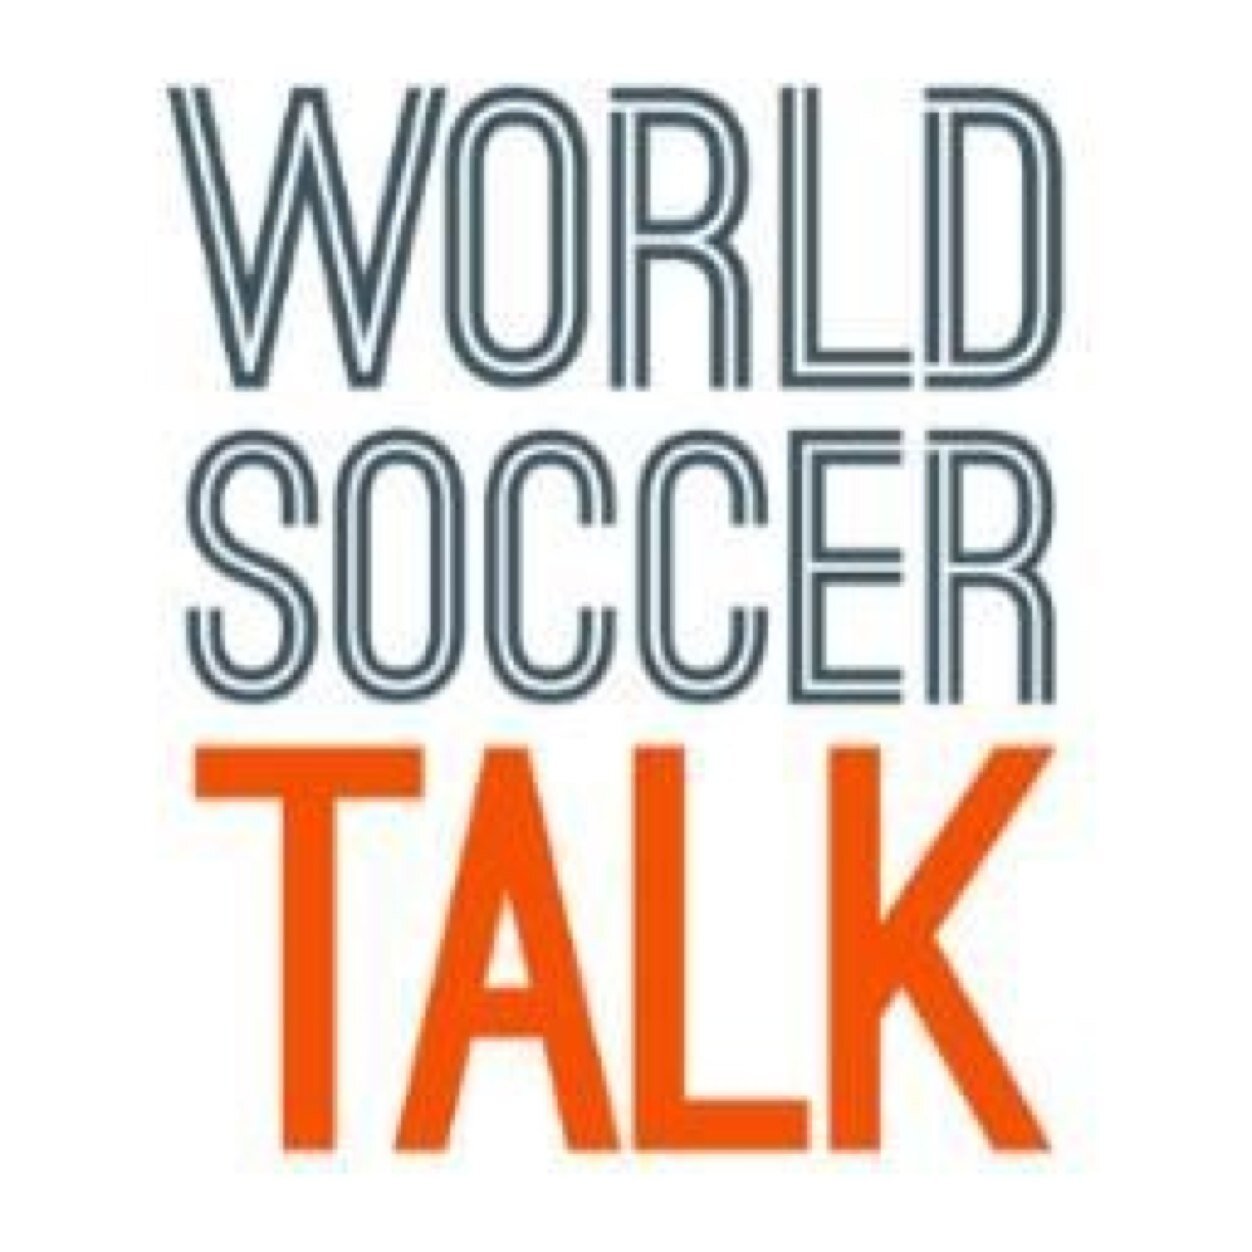 http://t.co/WttQsbYwYe, formerly MLS Talk, is a soccer website providing daily news, analysis and opinion by fans for fans. Founded in 2005.